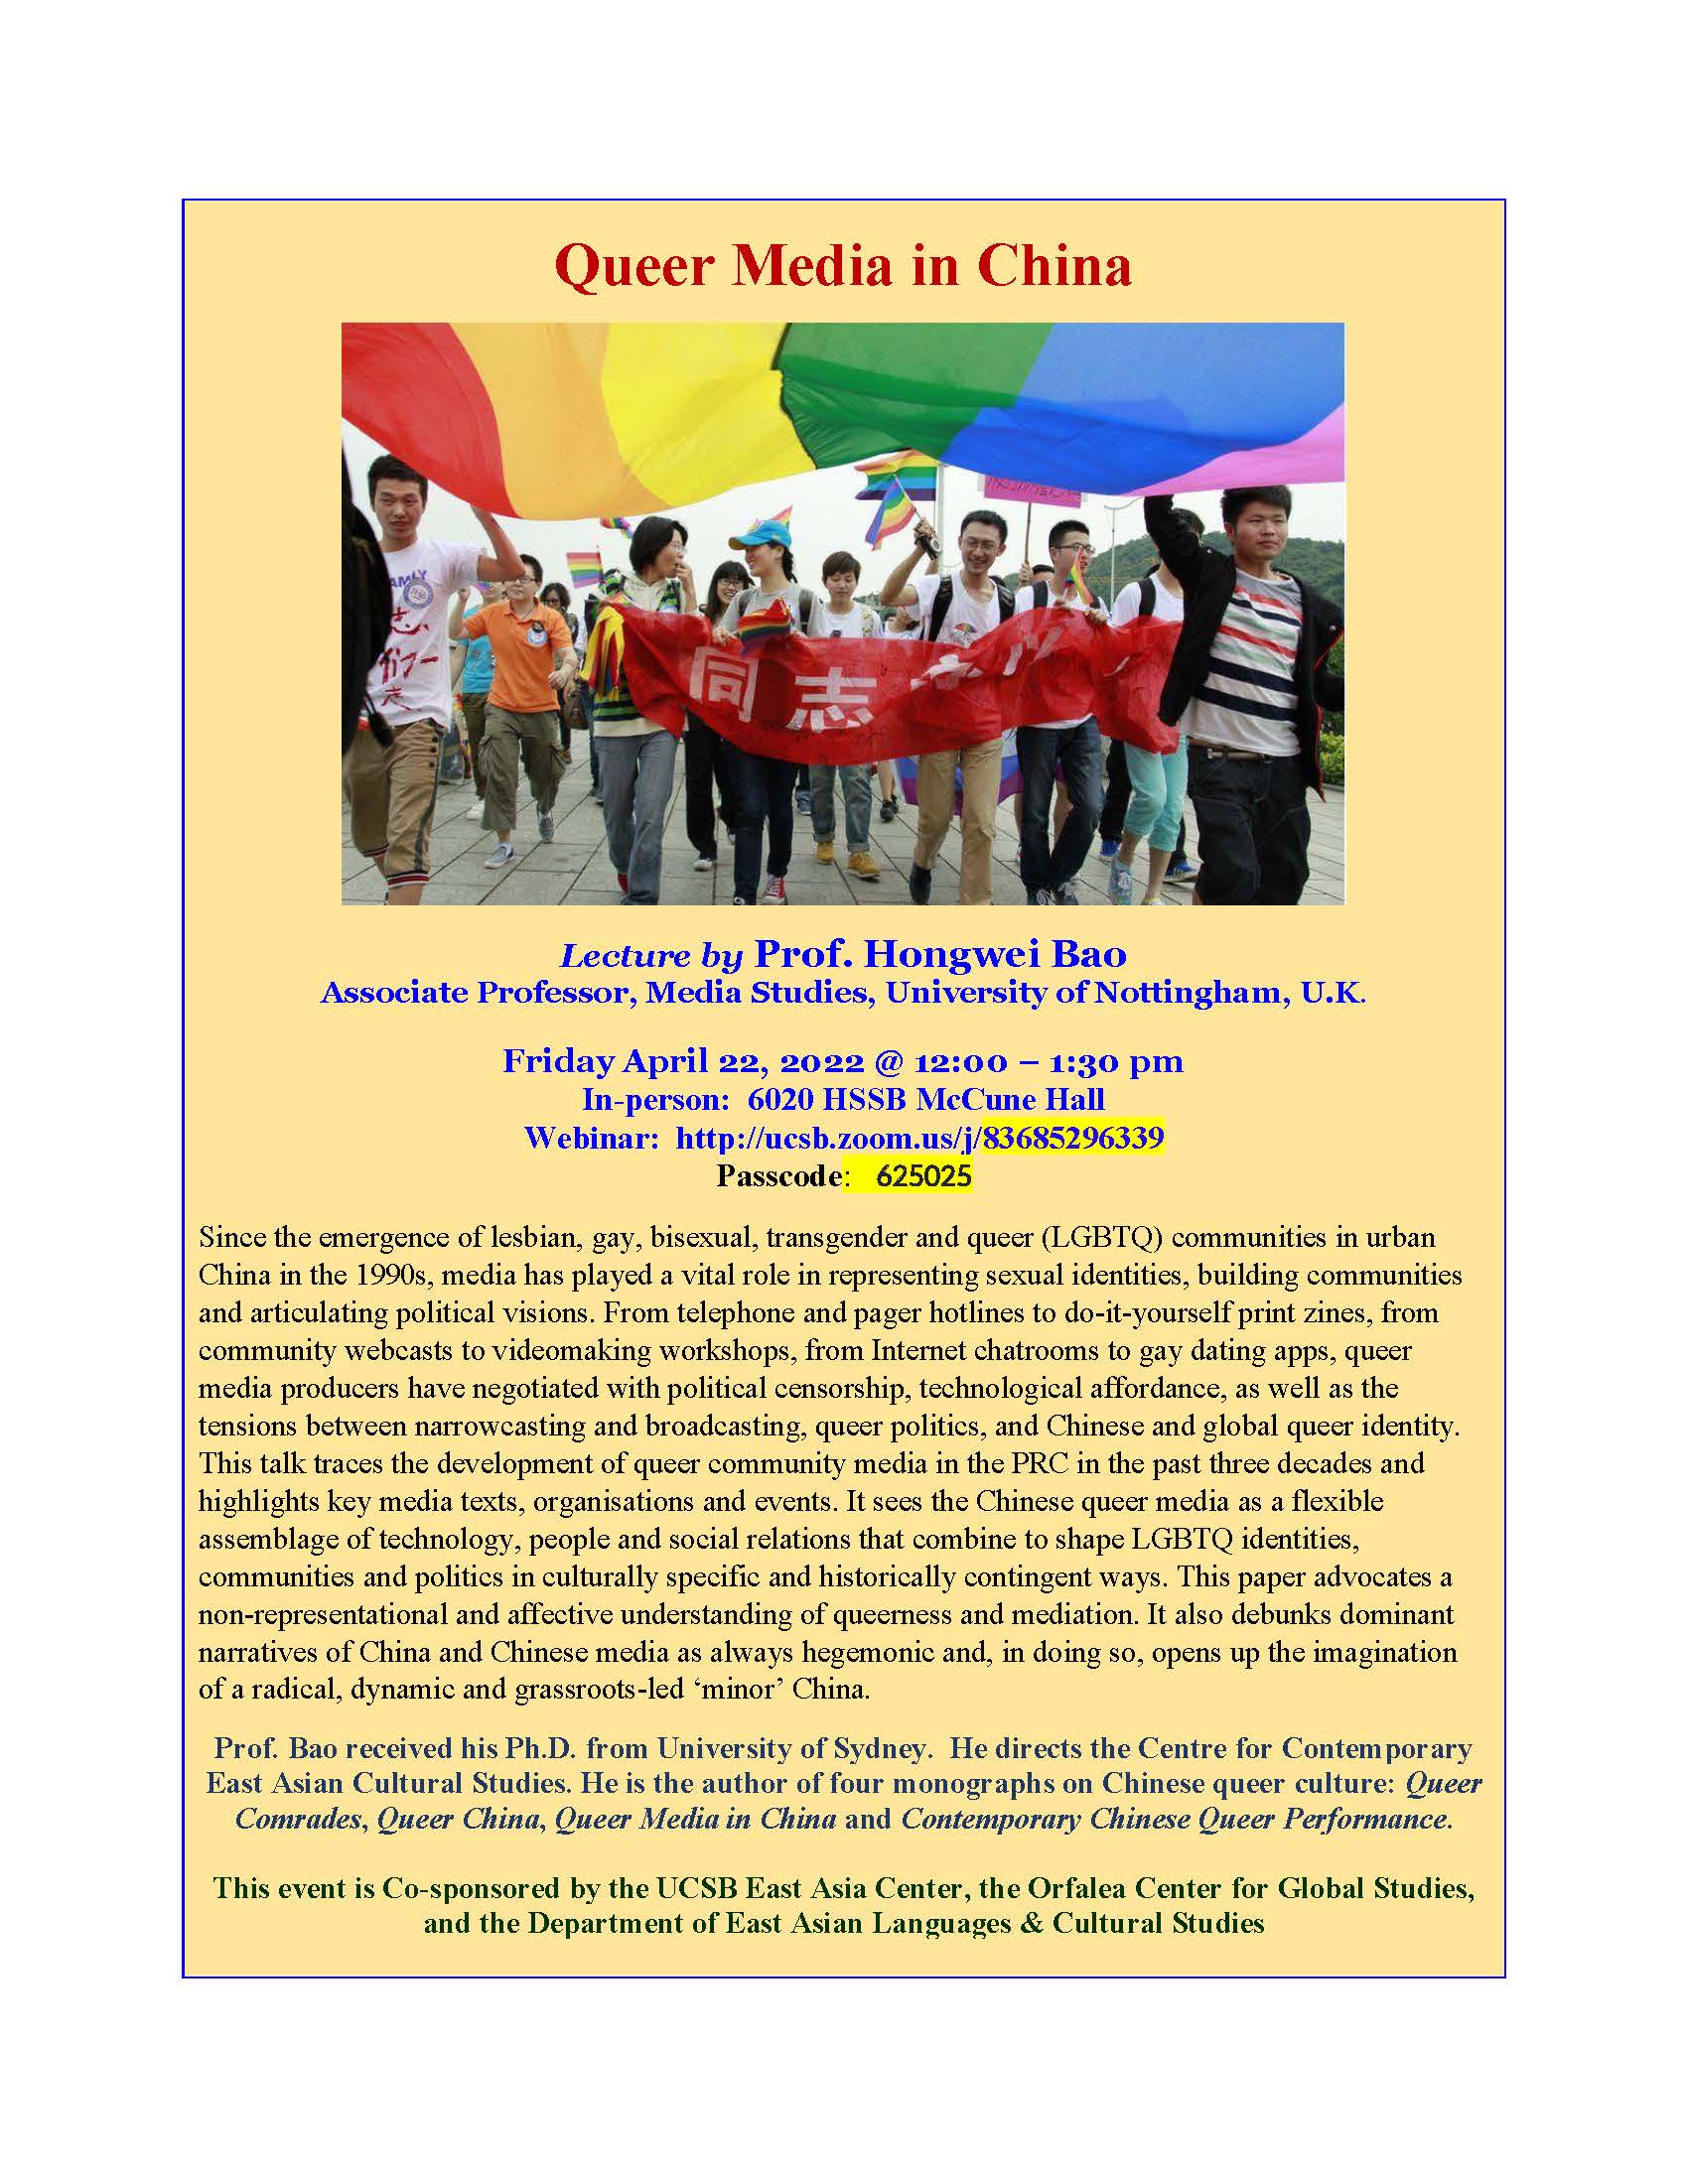 Flyer for "Queer Media in China", a lecture by Prof. Hongwei Bao on April 22, 2022 from 12-1:30PM at 6020 HSSB